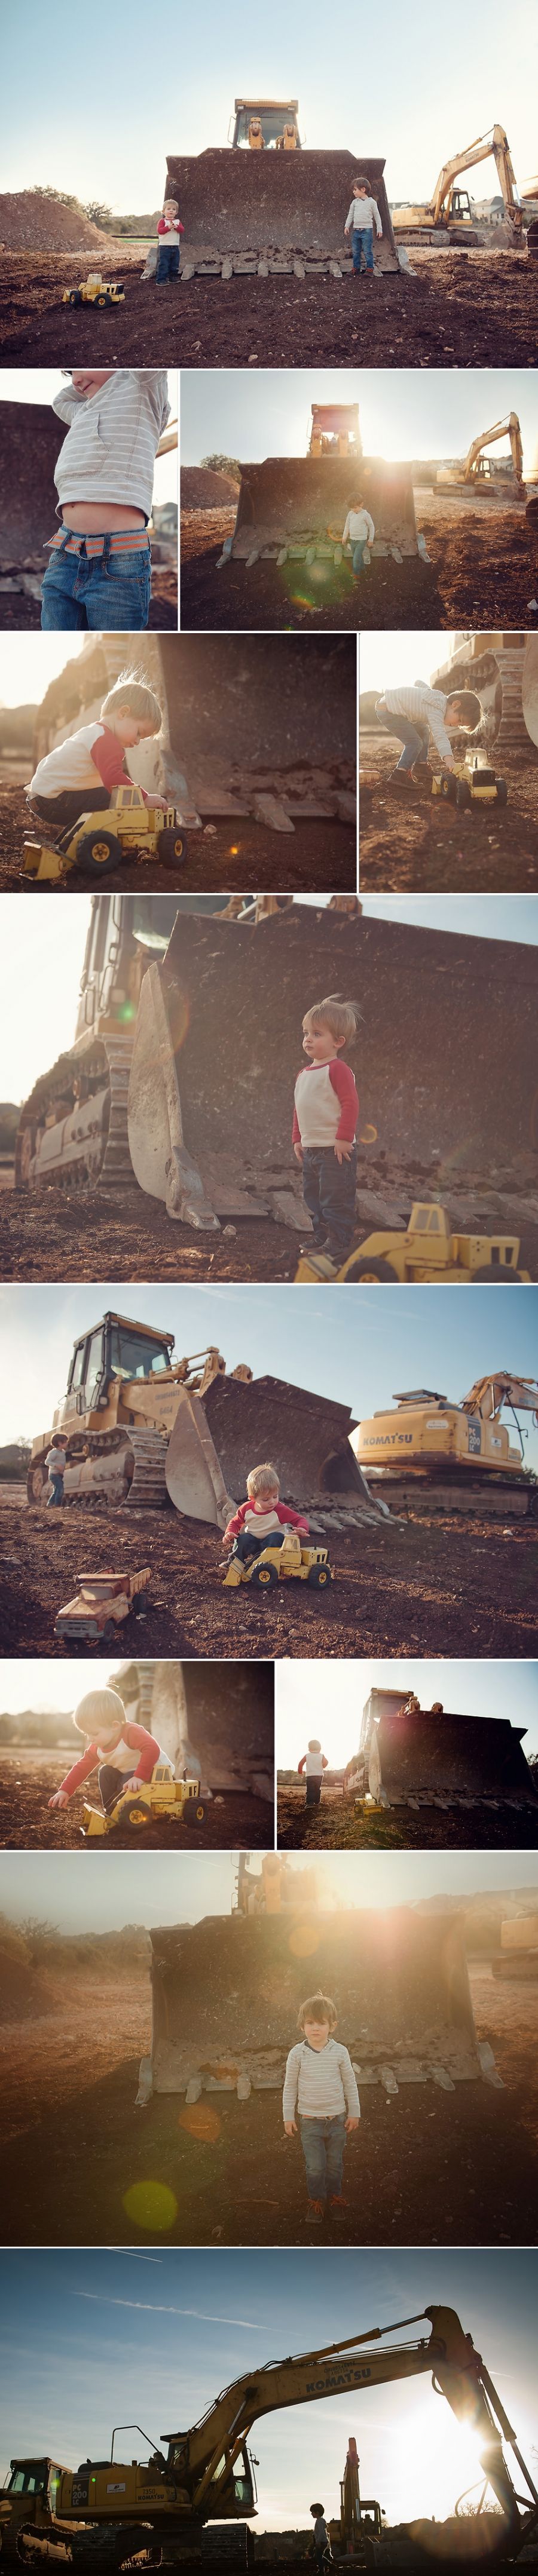 Heather Walker Photography boys and trucks photo shoot ……. I would love to d